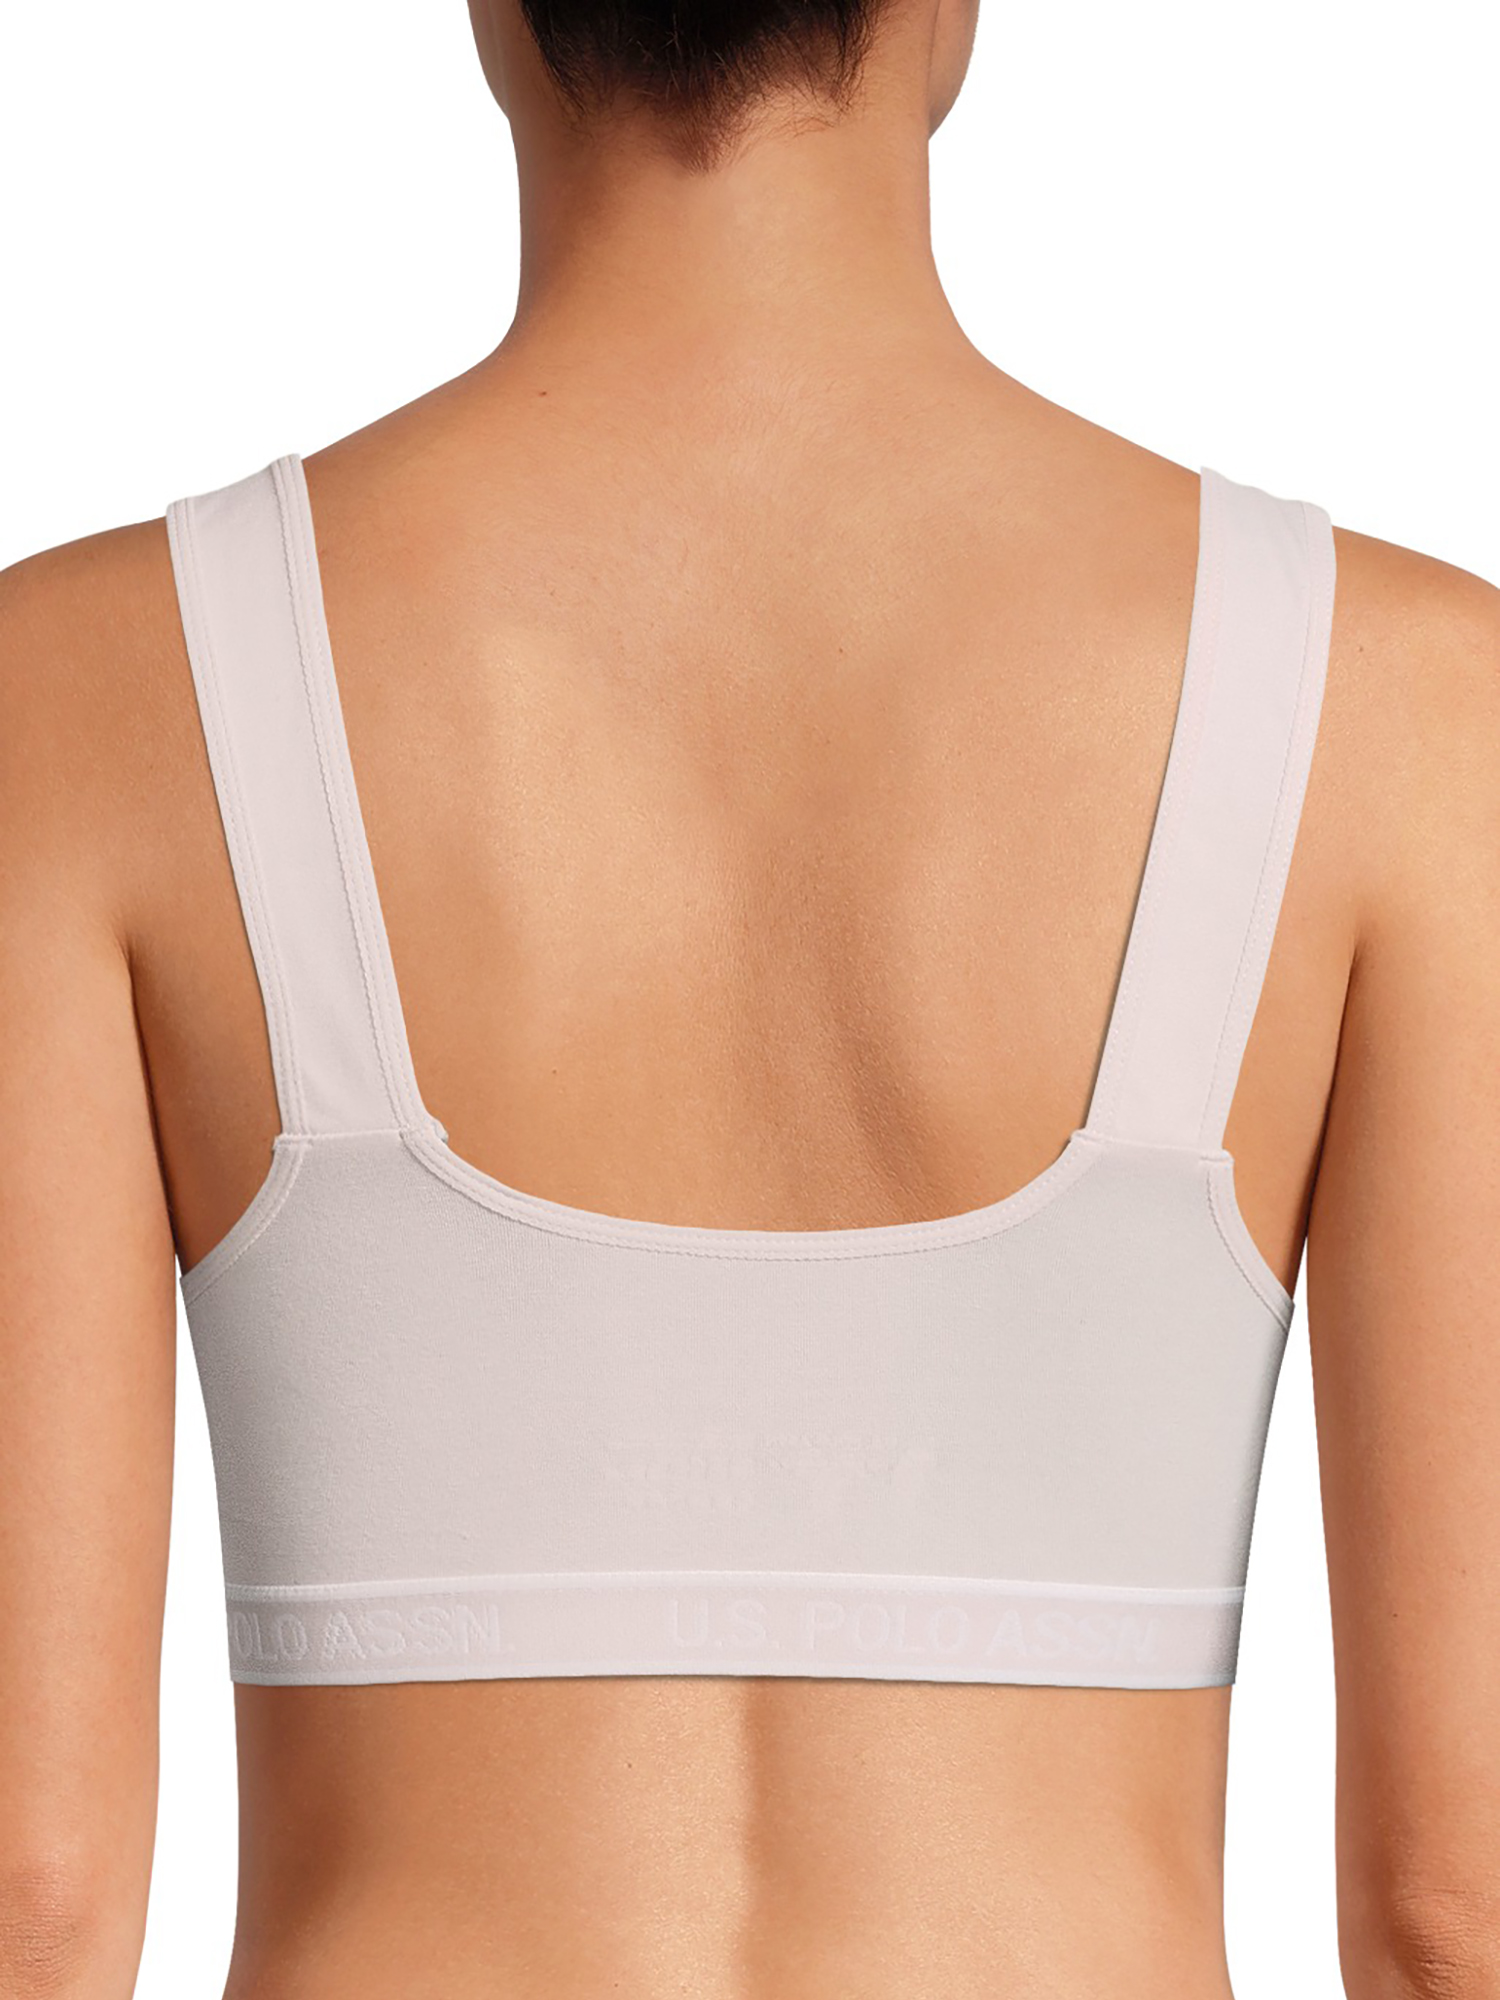 U.S. Polo Assn. Women's Tag-Free Striped Sports Bra Set, 3-Pack - image 4 of 4